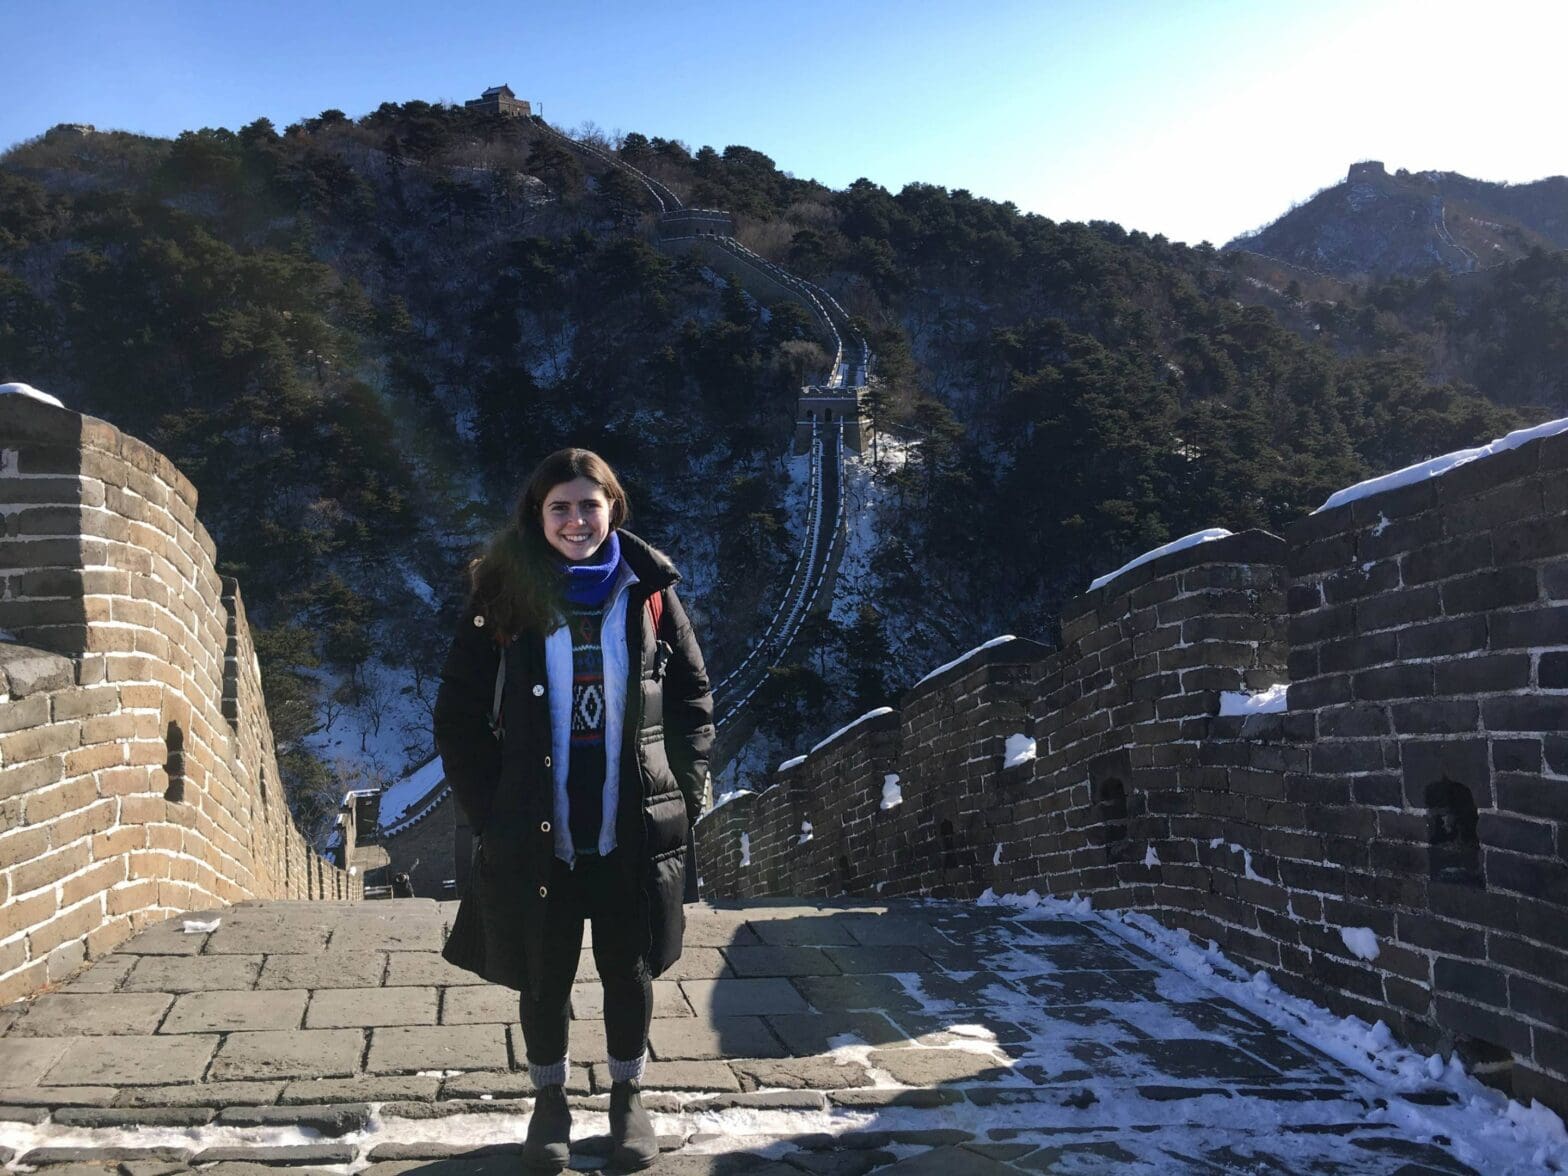 Naomi Cohen-Shields of Princeton’s Class of 2020 pictured at the Great Wall of China.